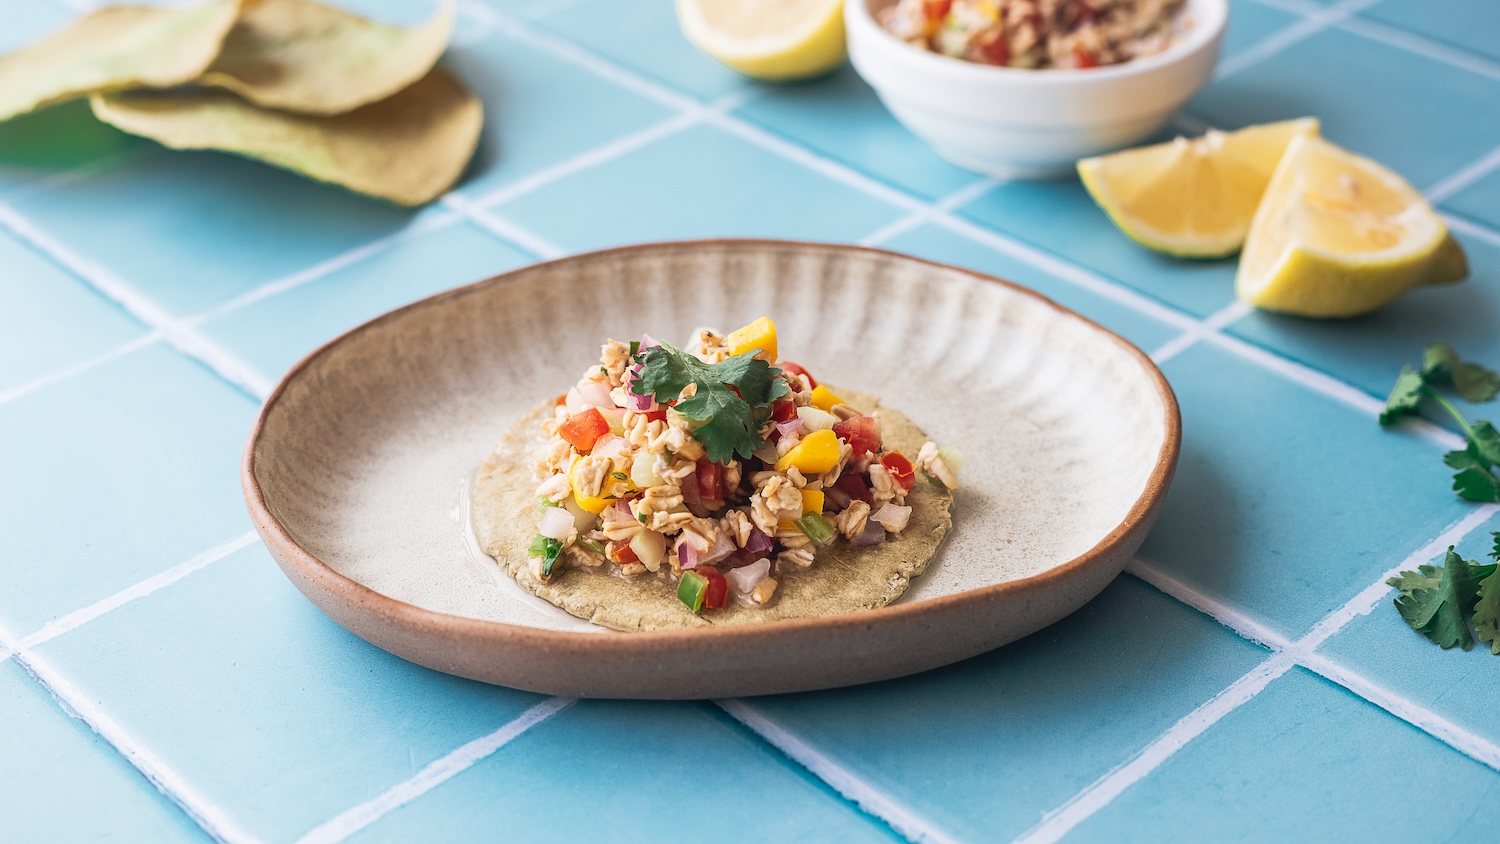 Celebrating a Decade of Oat-Based Culinary Innovation in Mexico